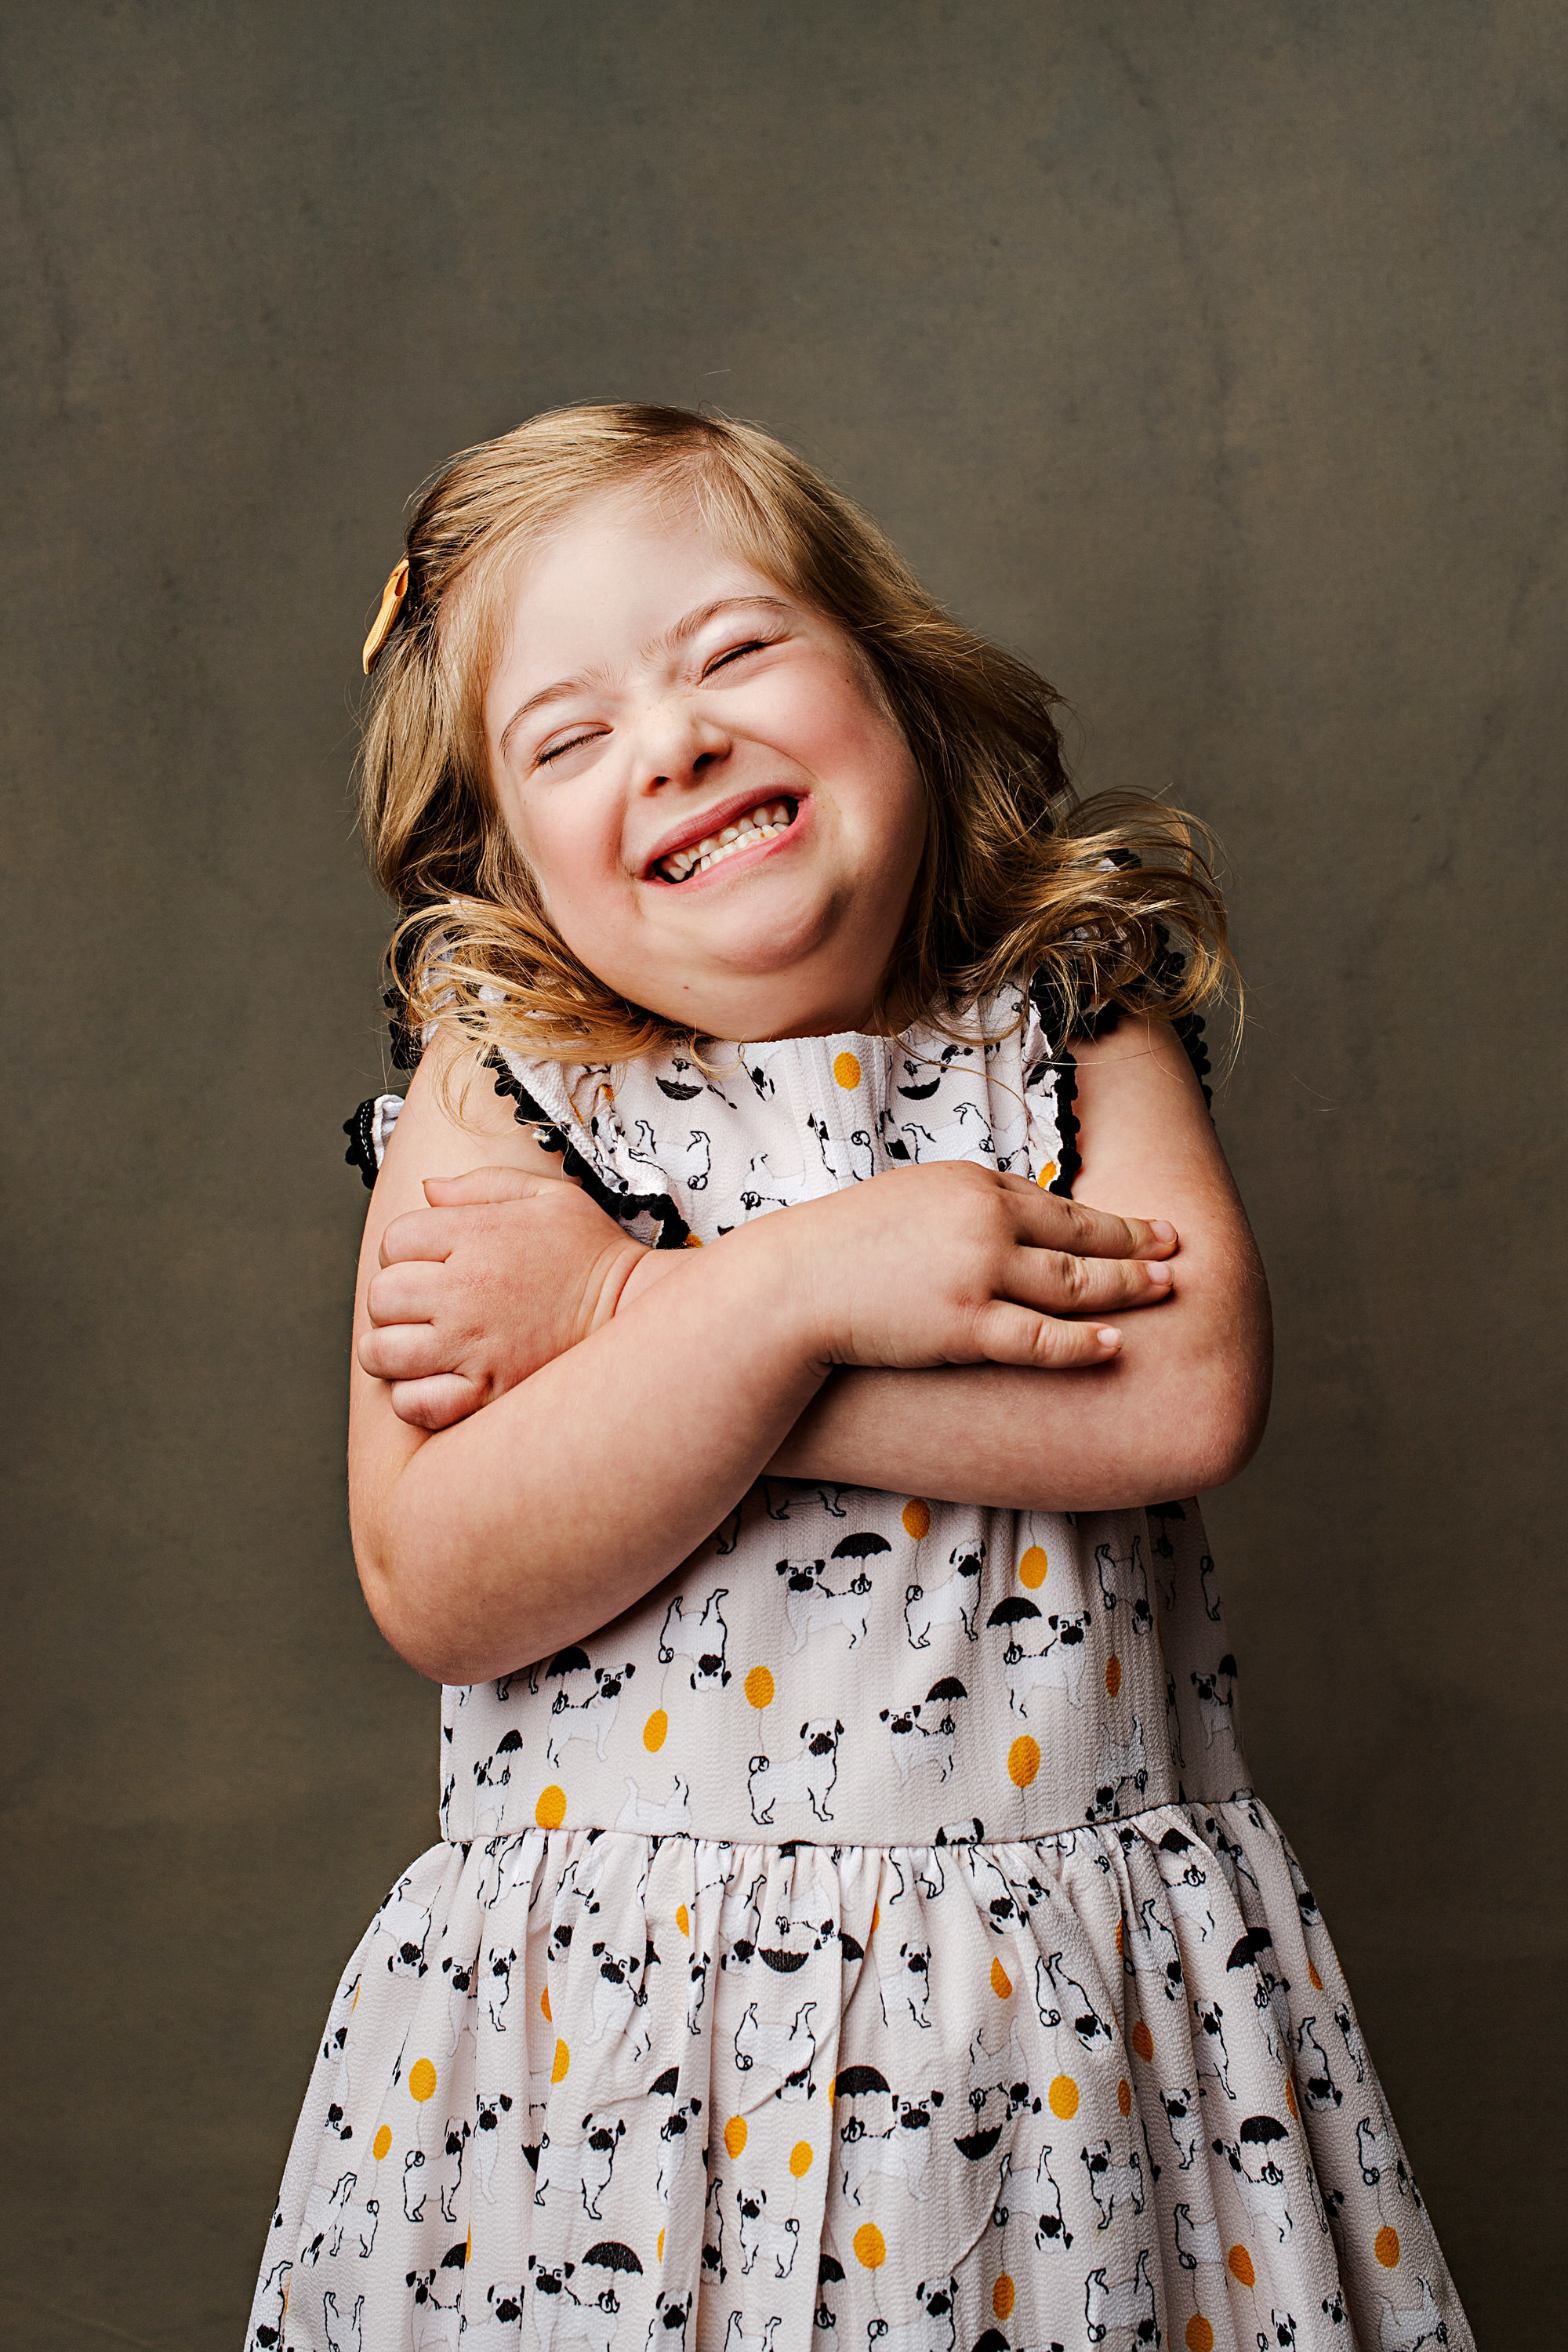 Noelle Hart, girl with Down syndrome wearing a floral dress and laughing.